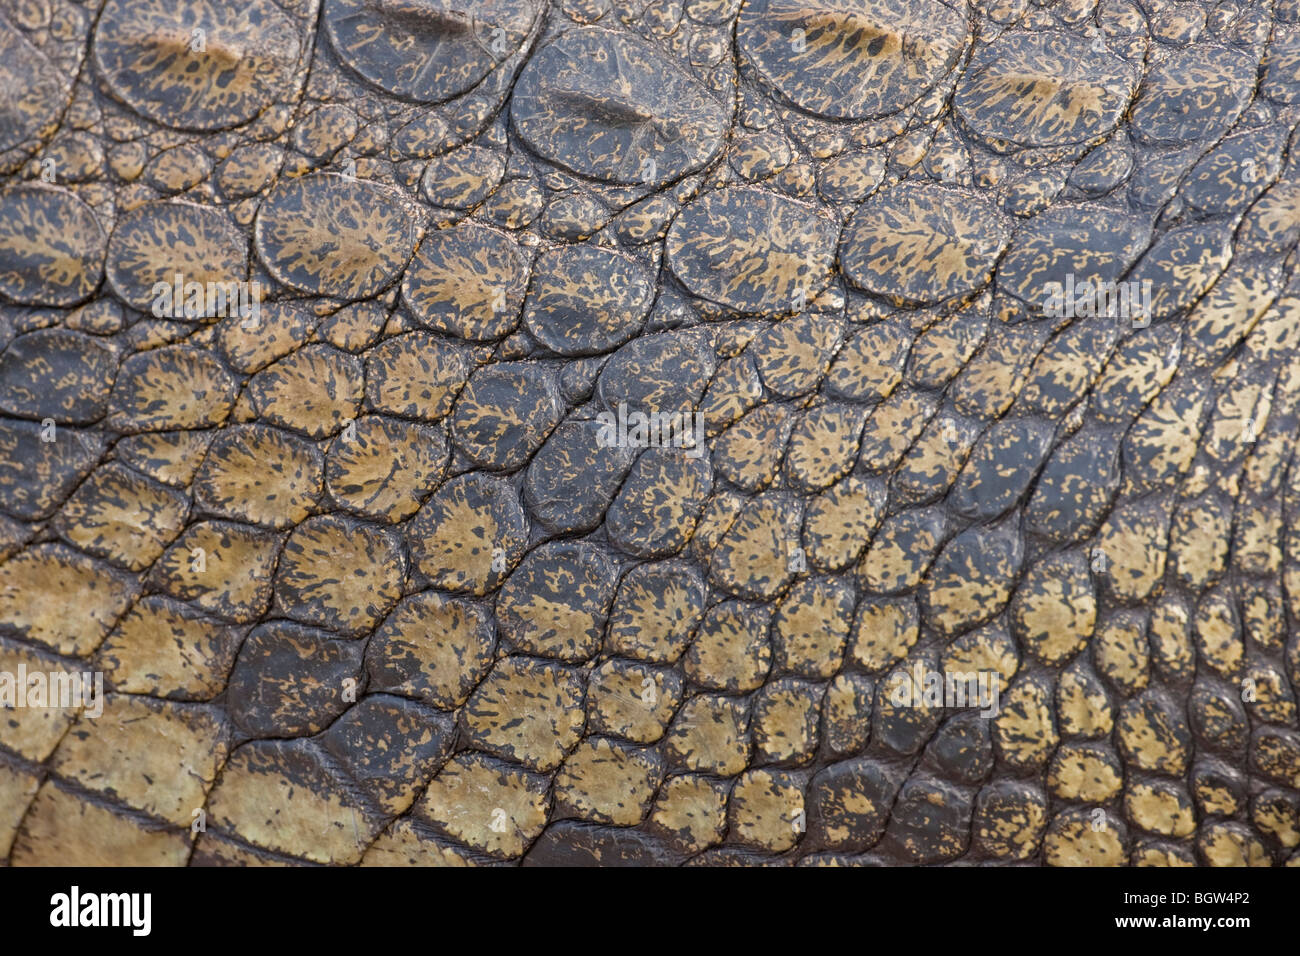 Macro photo of the scales of a nile crocodile. The photo was taken in Botswana's Chobe national park. Stock Photo